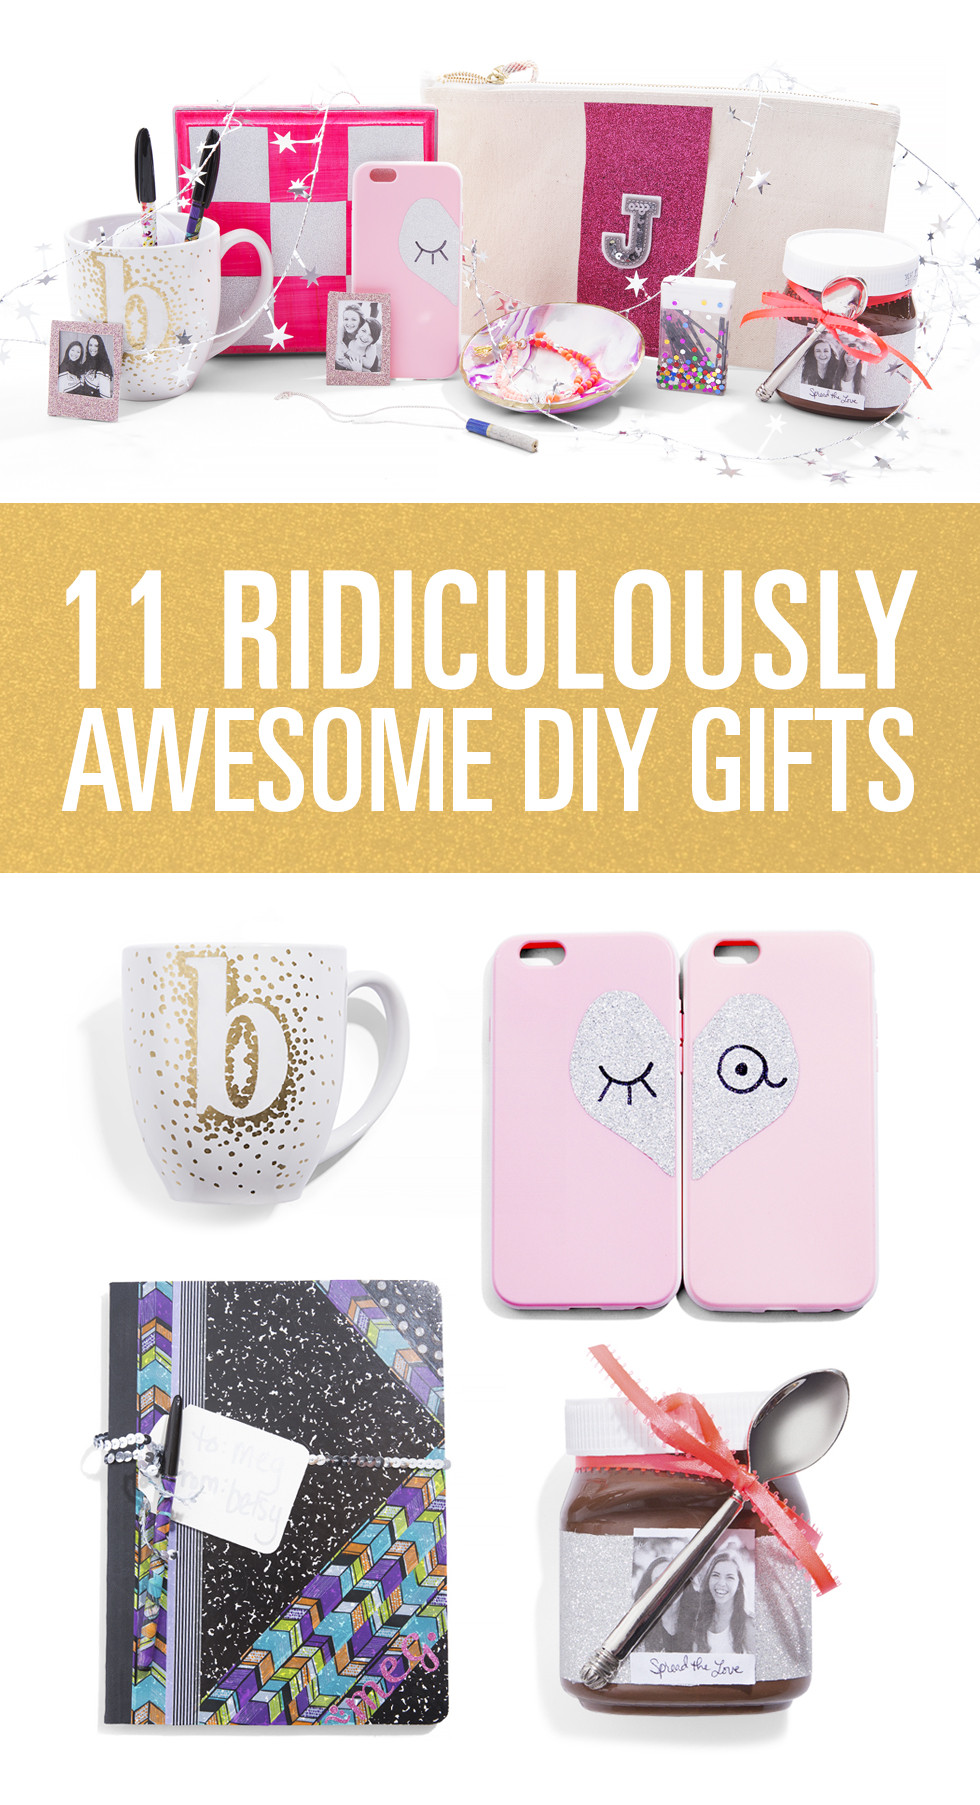 Bff Gifts DIY
 DIY Gifts For Friends DIY Gifts